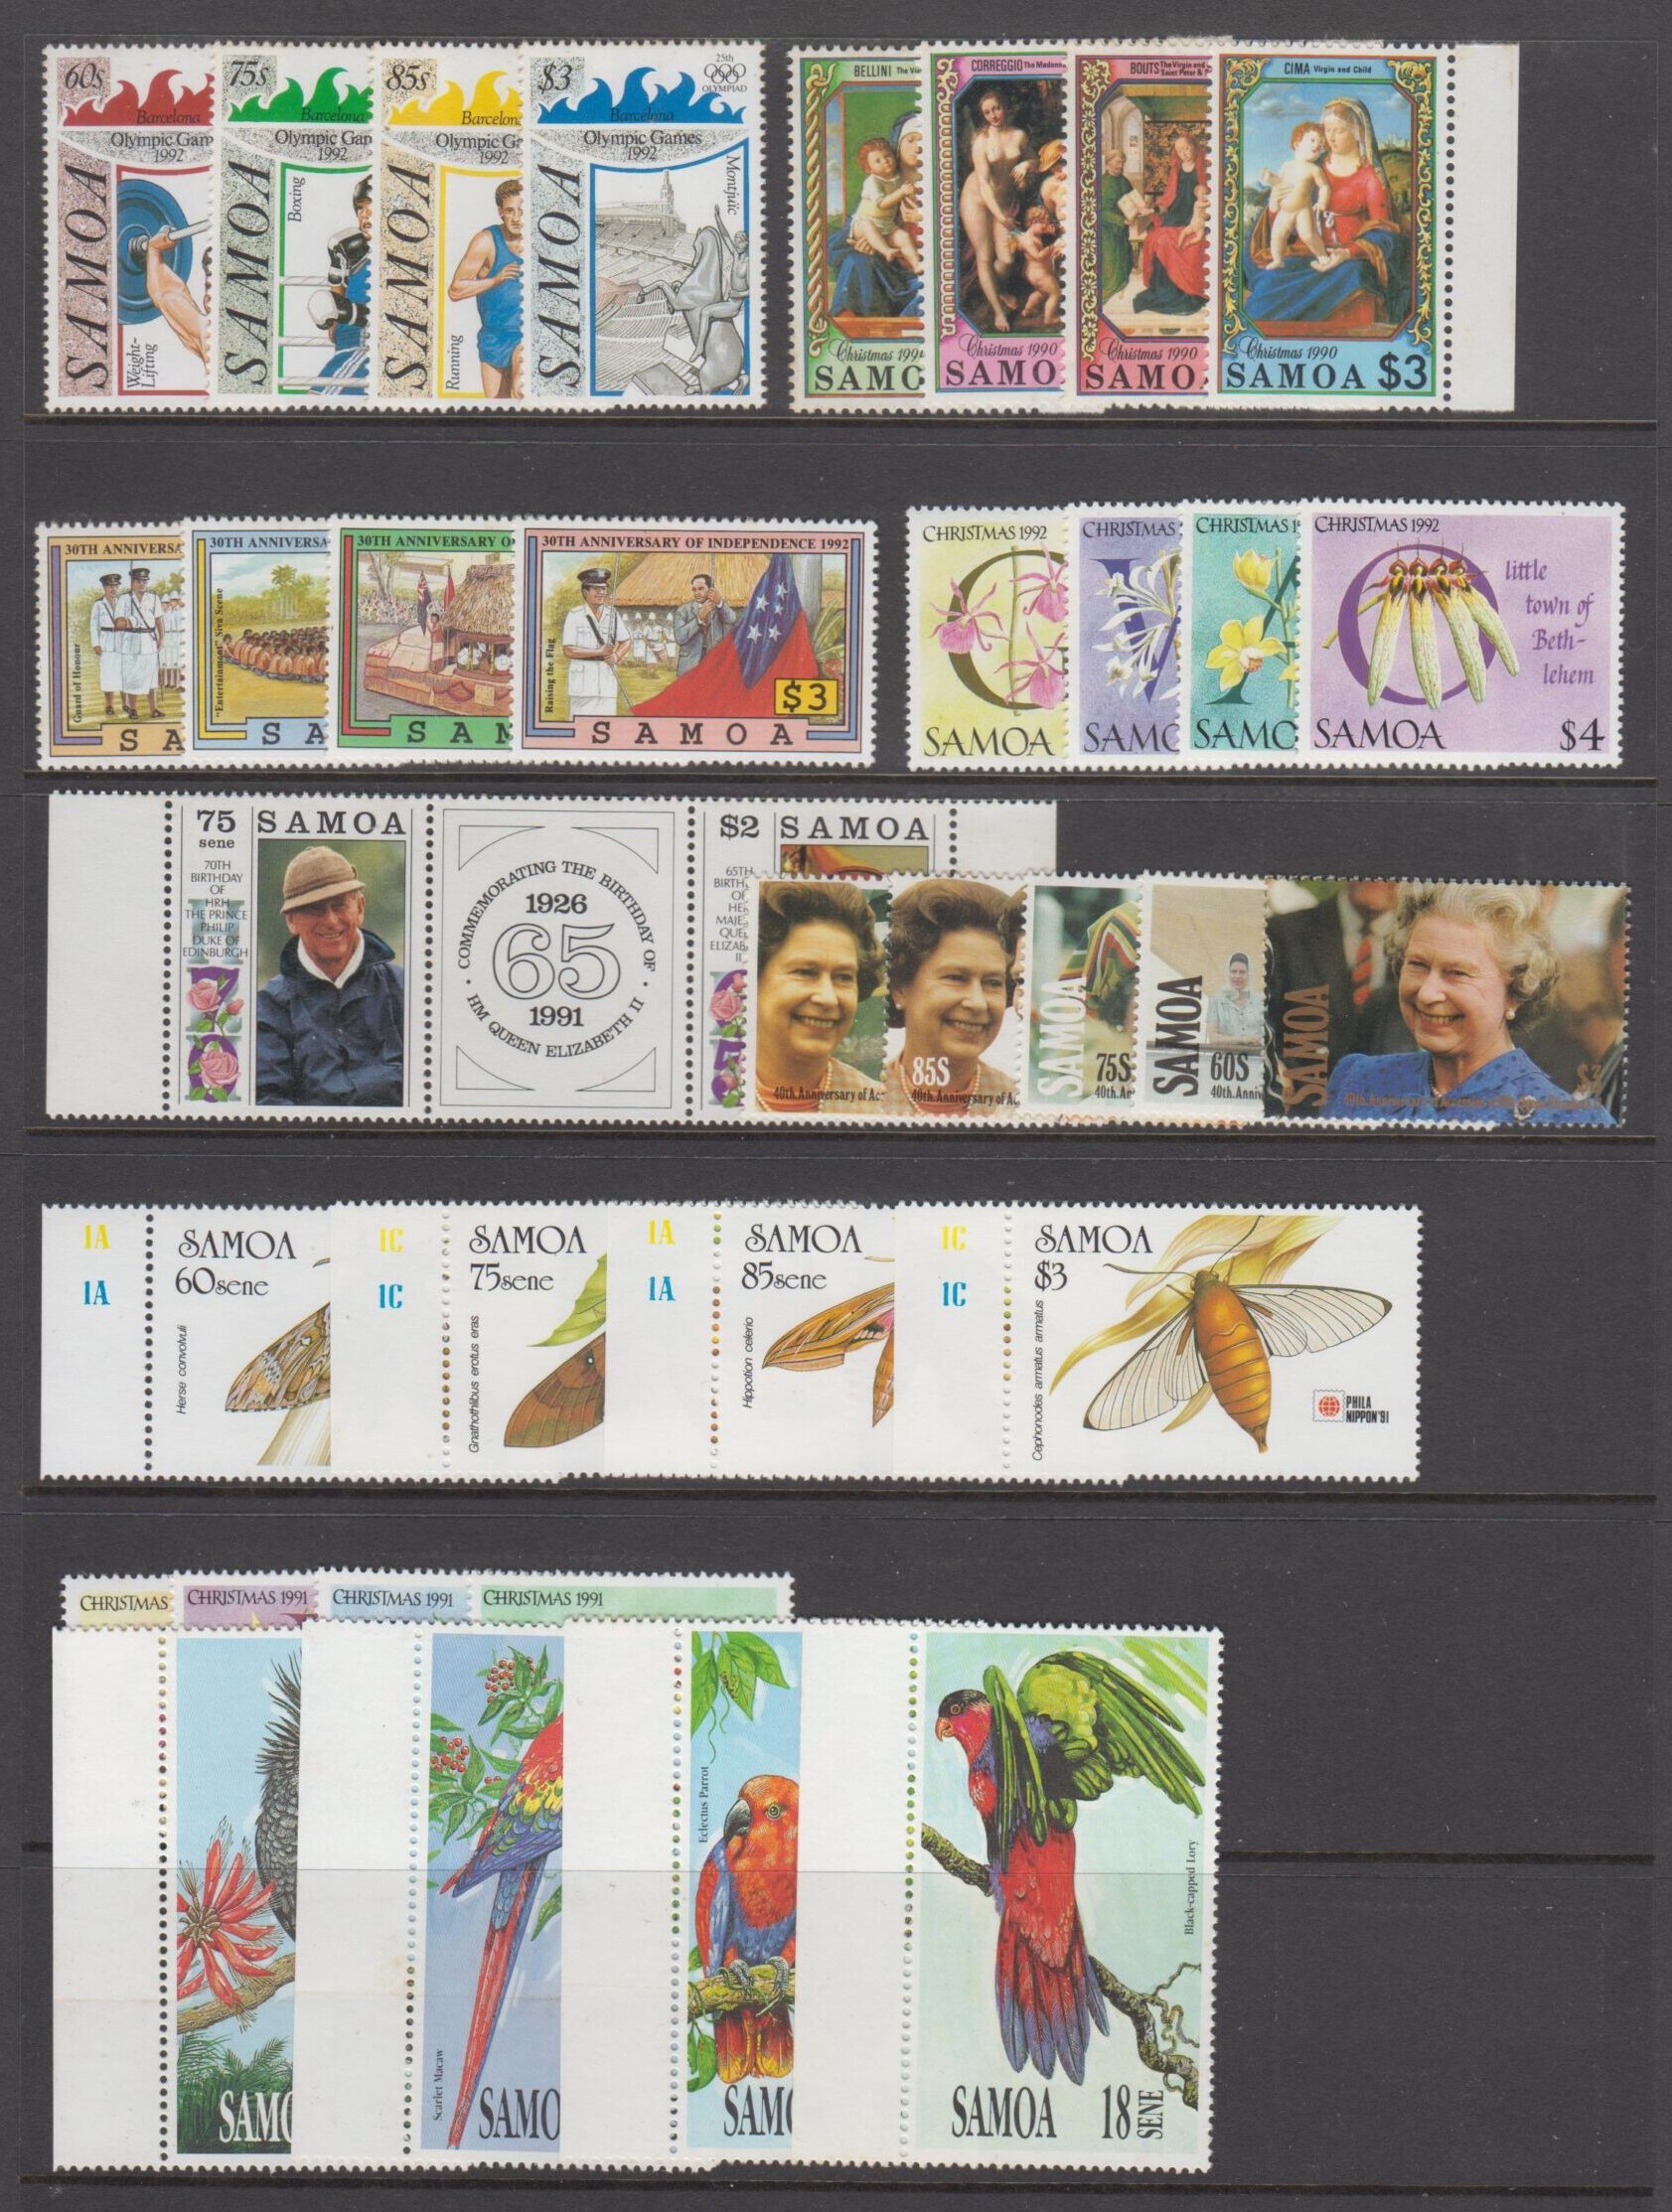 SAMOA 1991-1992 Sets of Stamps on Hagner Page - Peter Walters Stamps